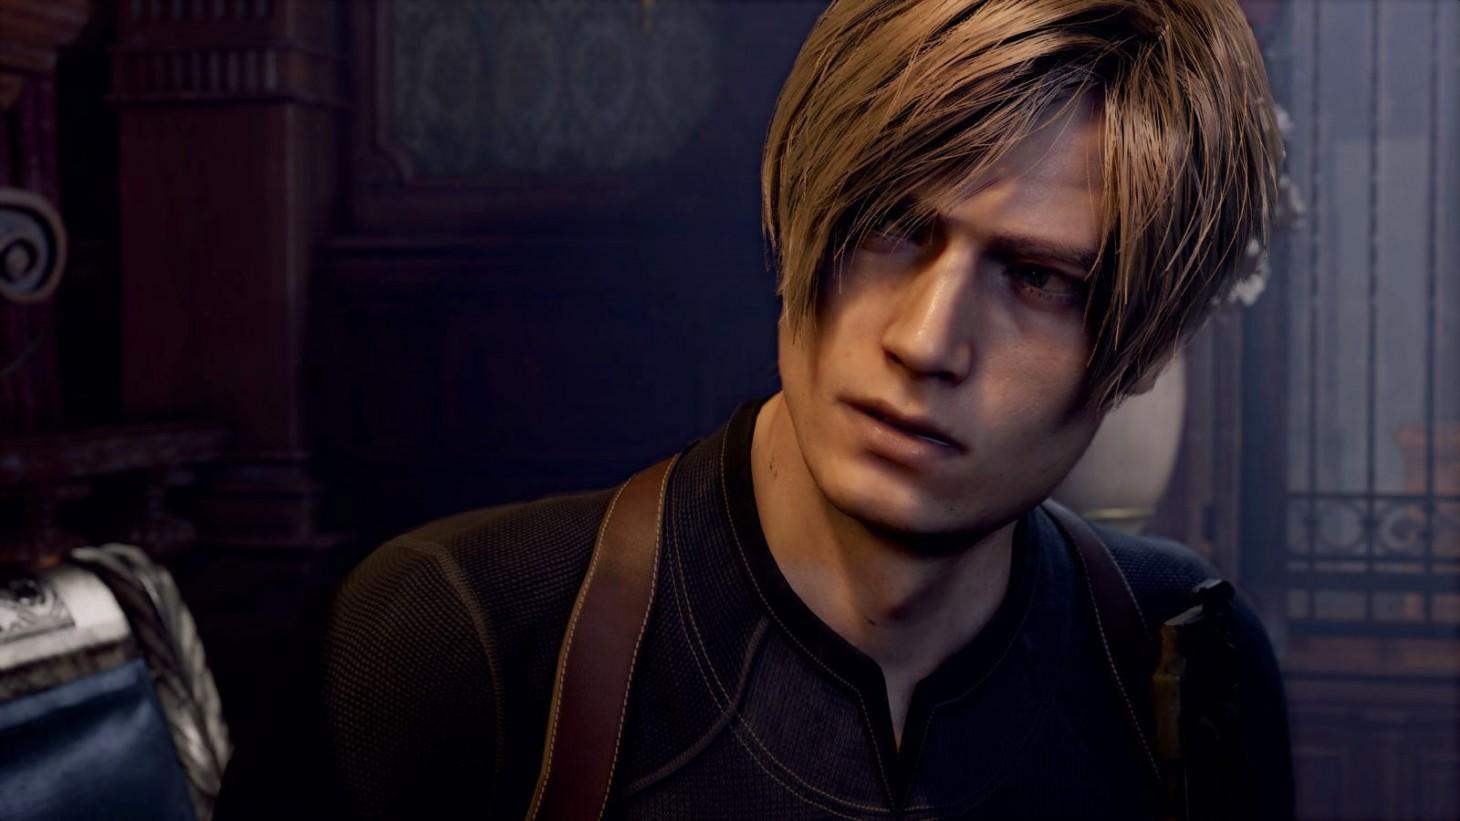 Resident Evil 4 Apk for Android Latest Version 2023 